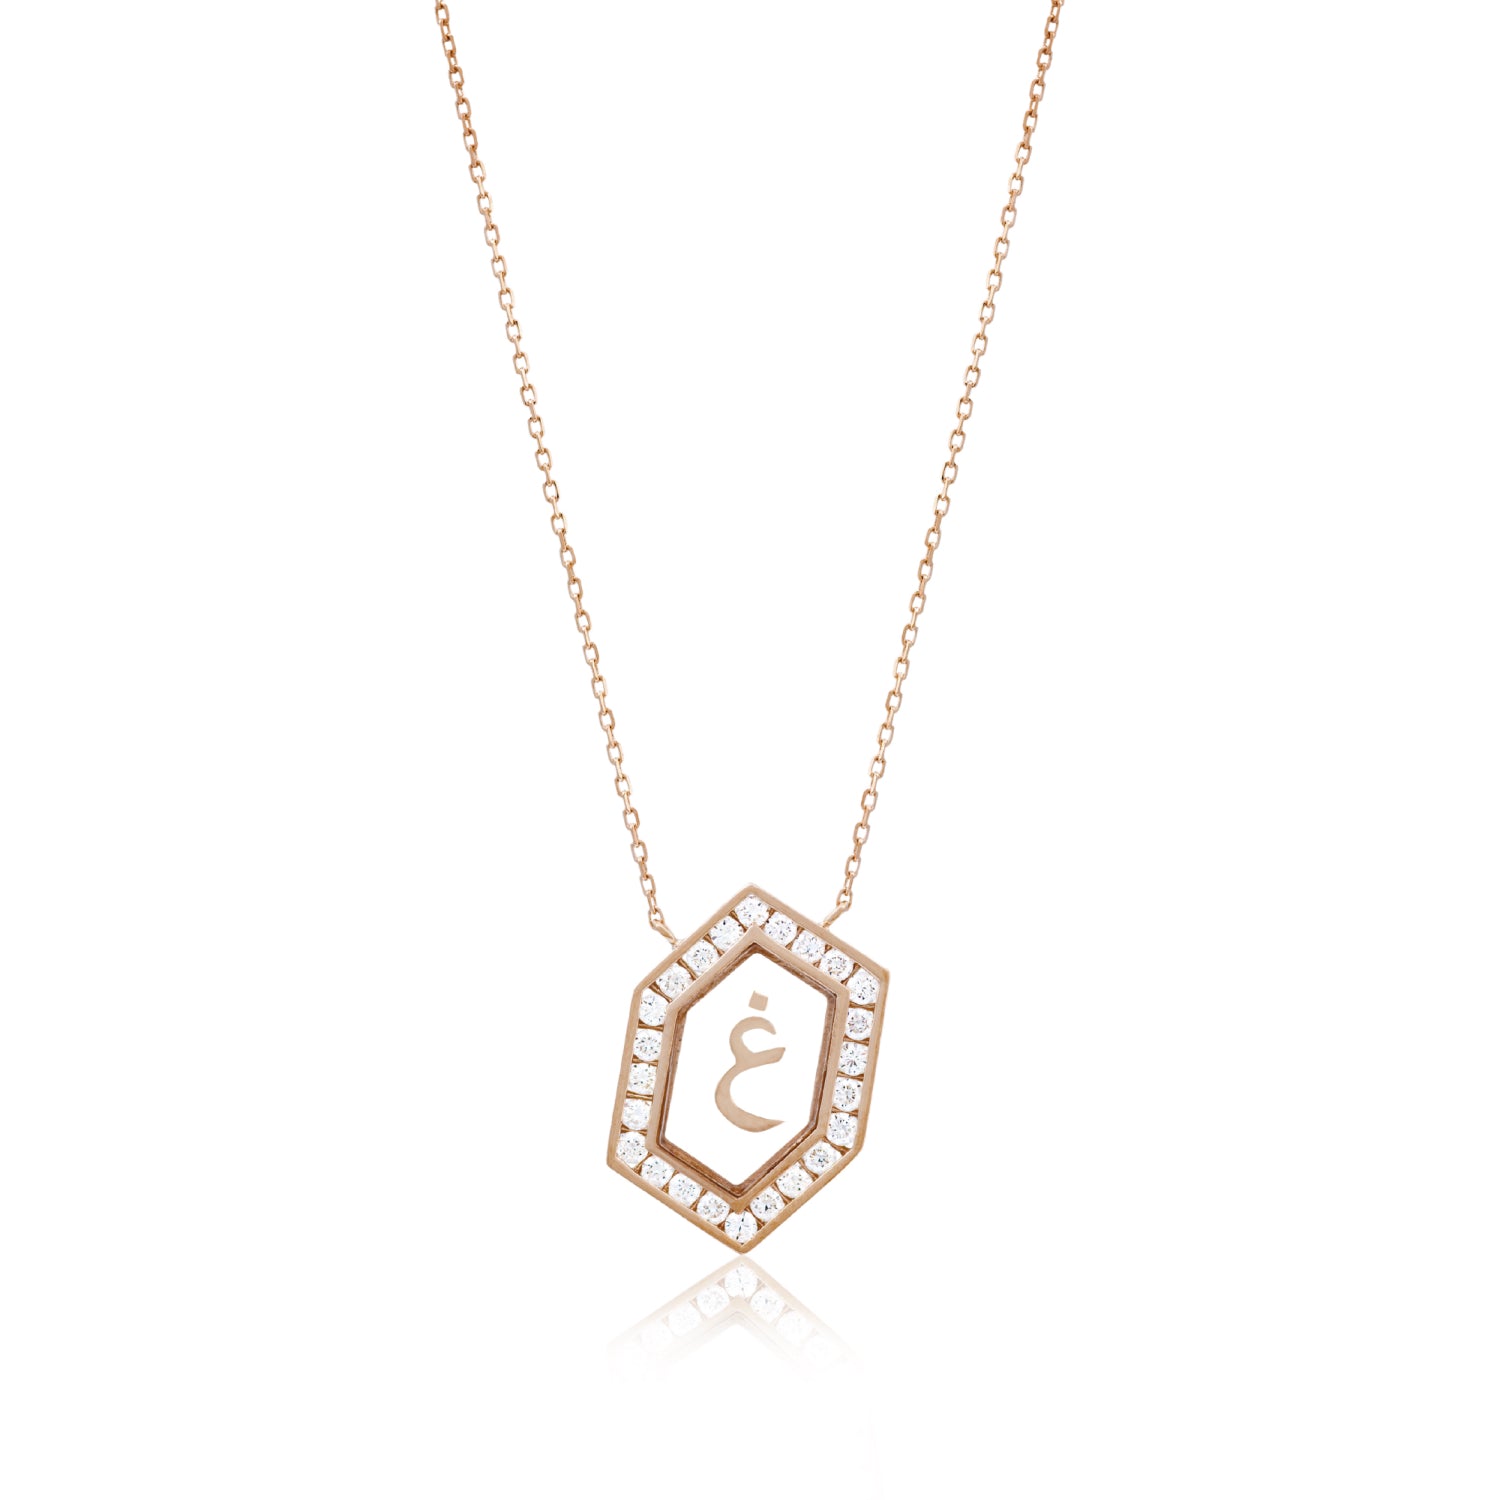 Qamoos 1.0 Letter غ Diamond Necklace in Rose Gold